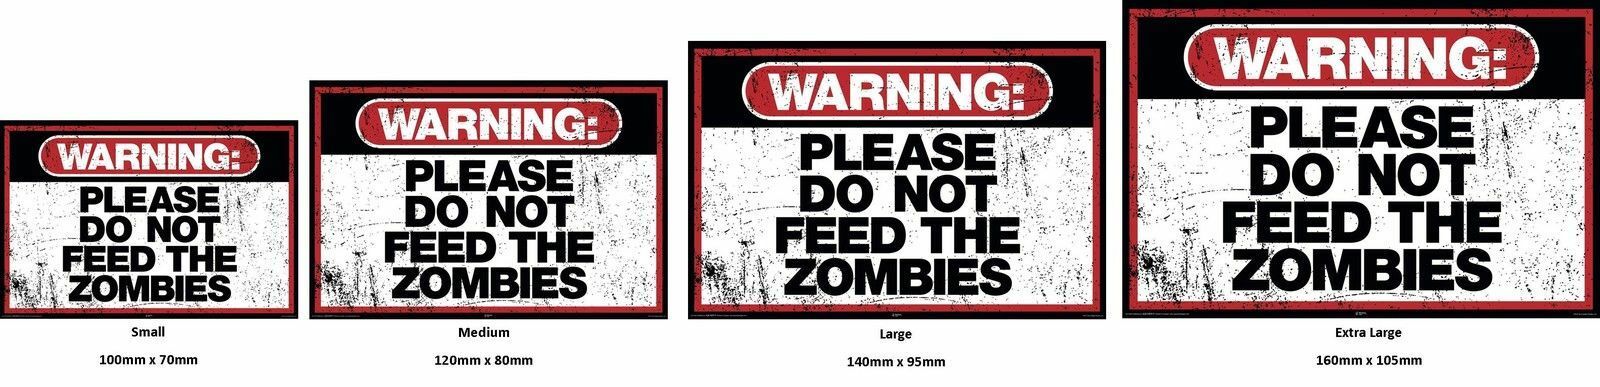 Do Not Feed The Zombies Warning Sticker Self Adhesive for Office